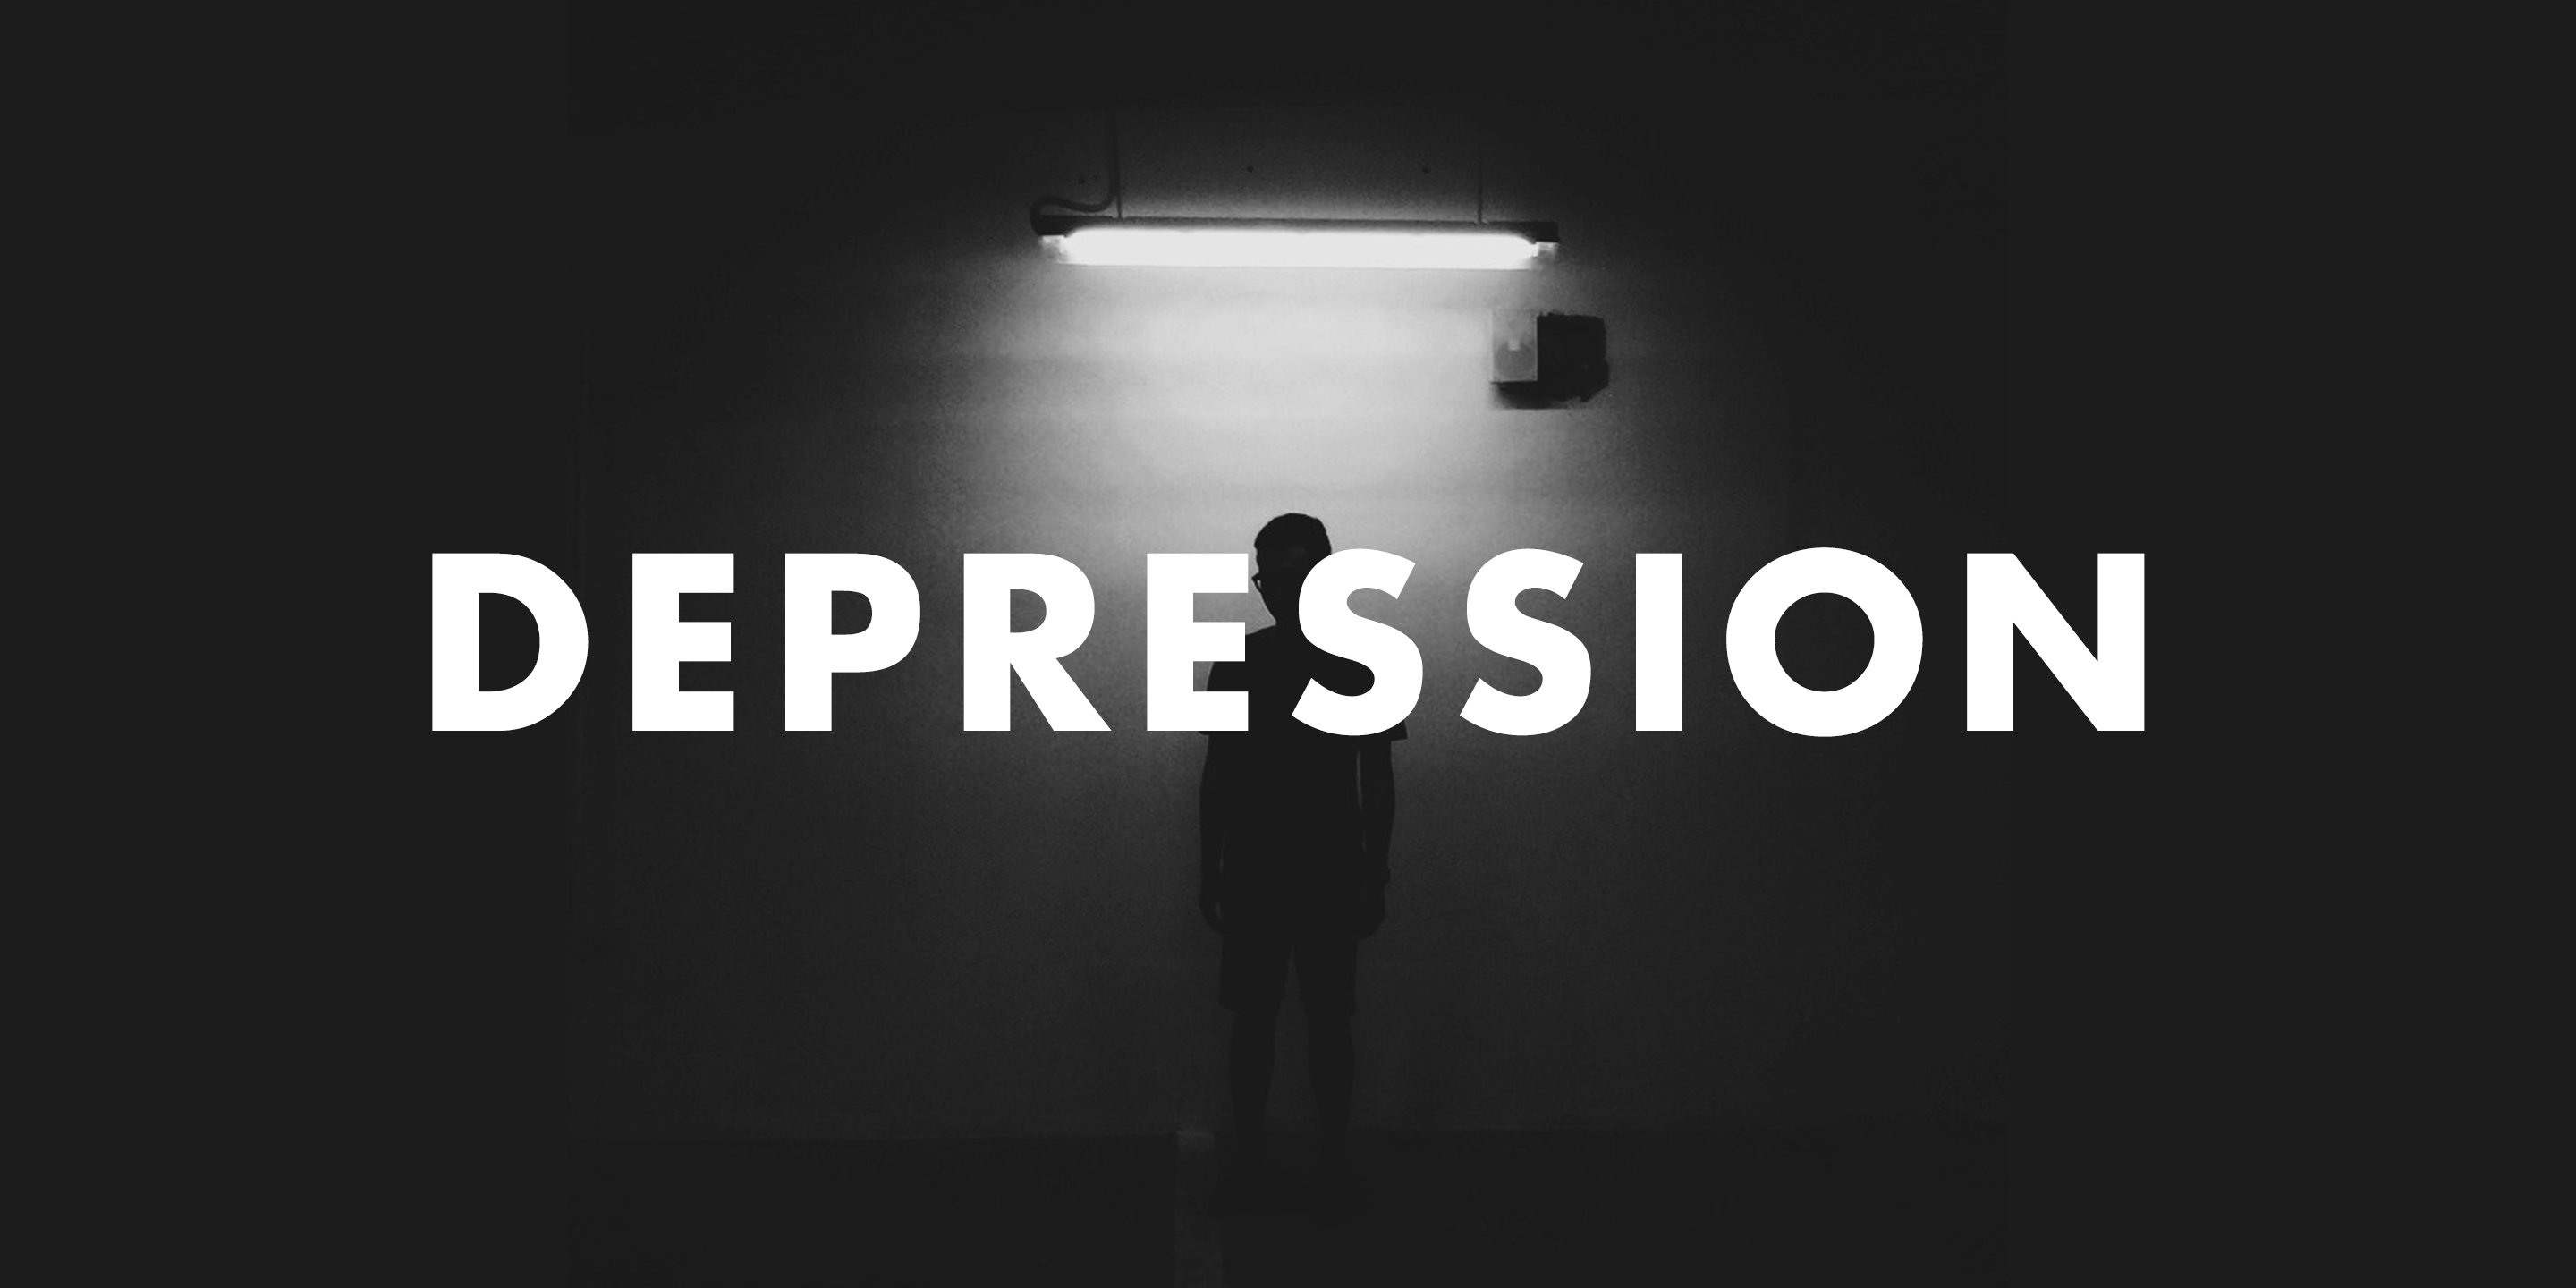 Wallpapers For Depressed People Wallpapers